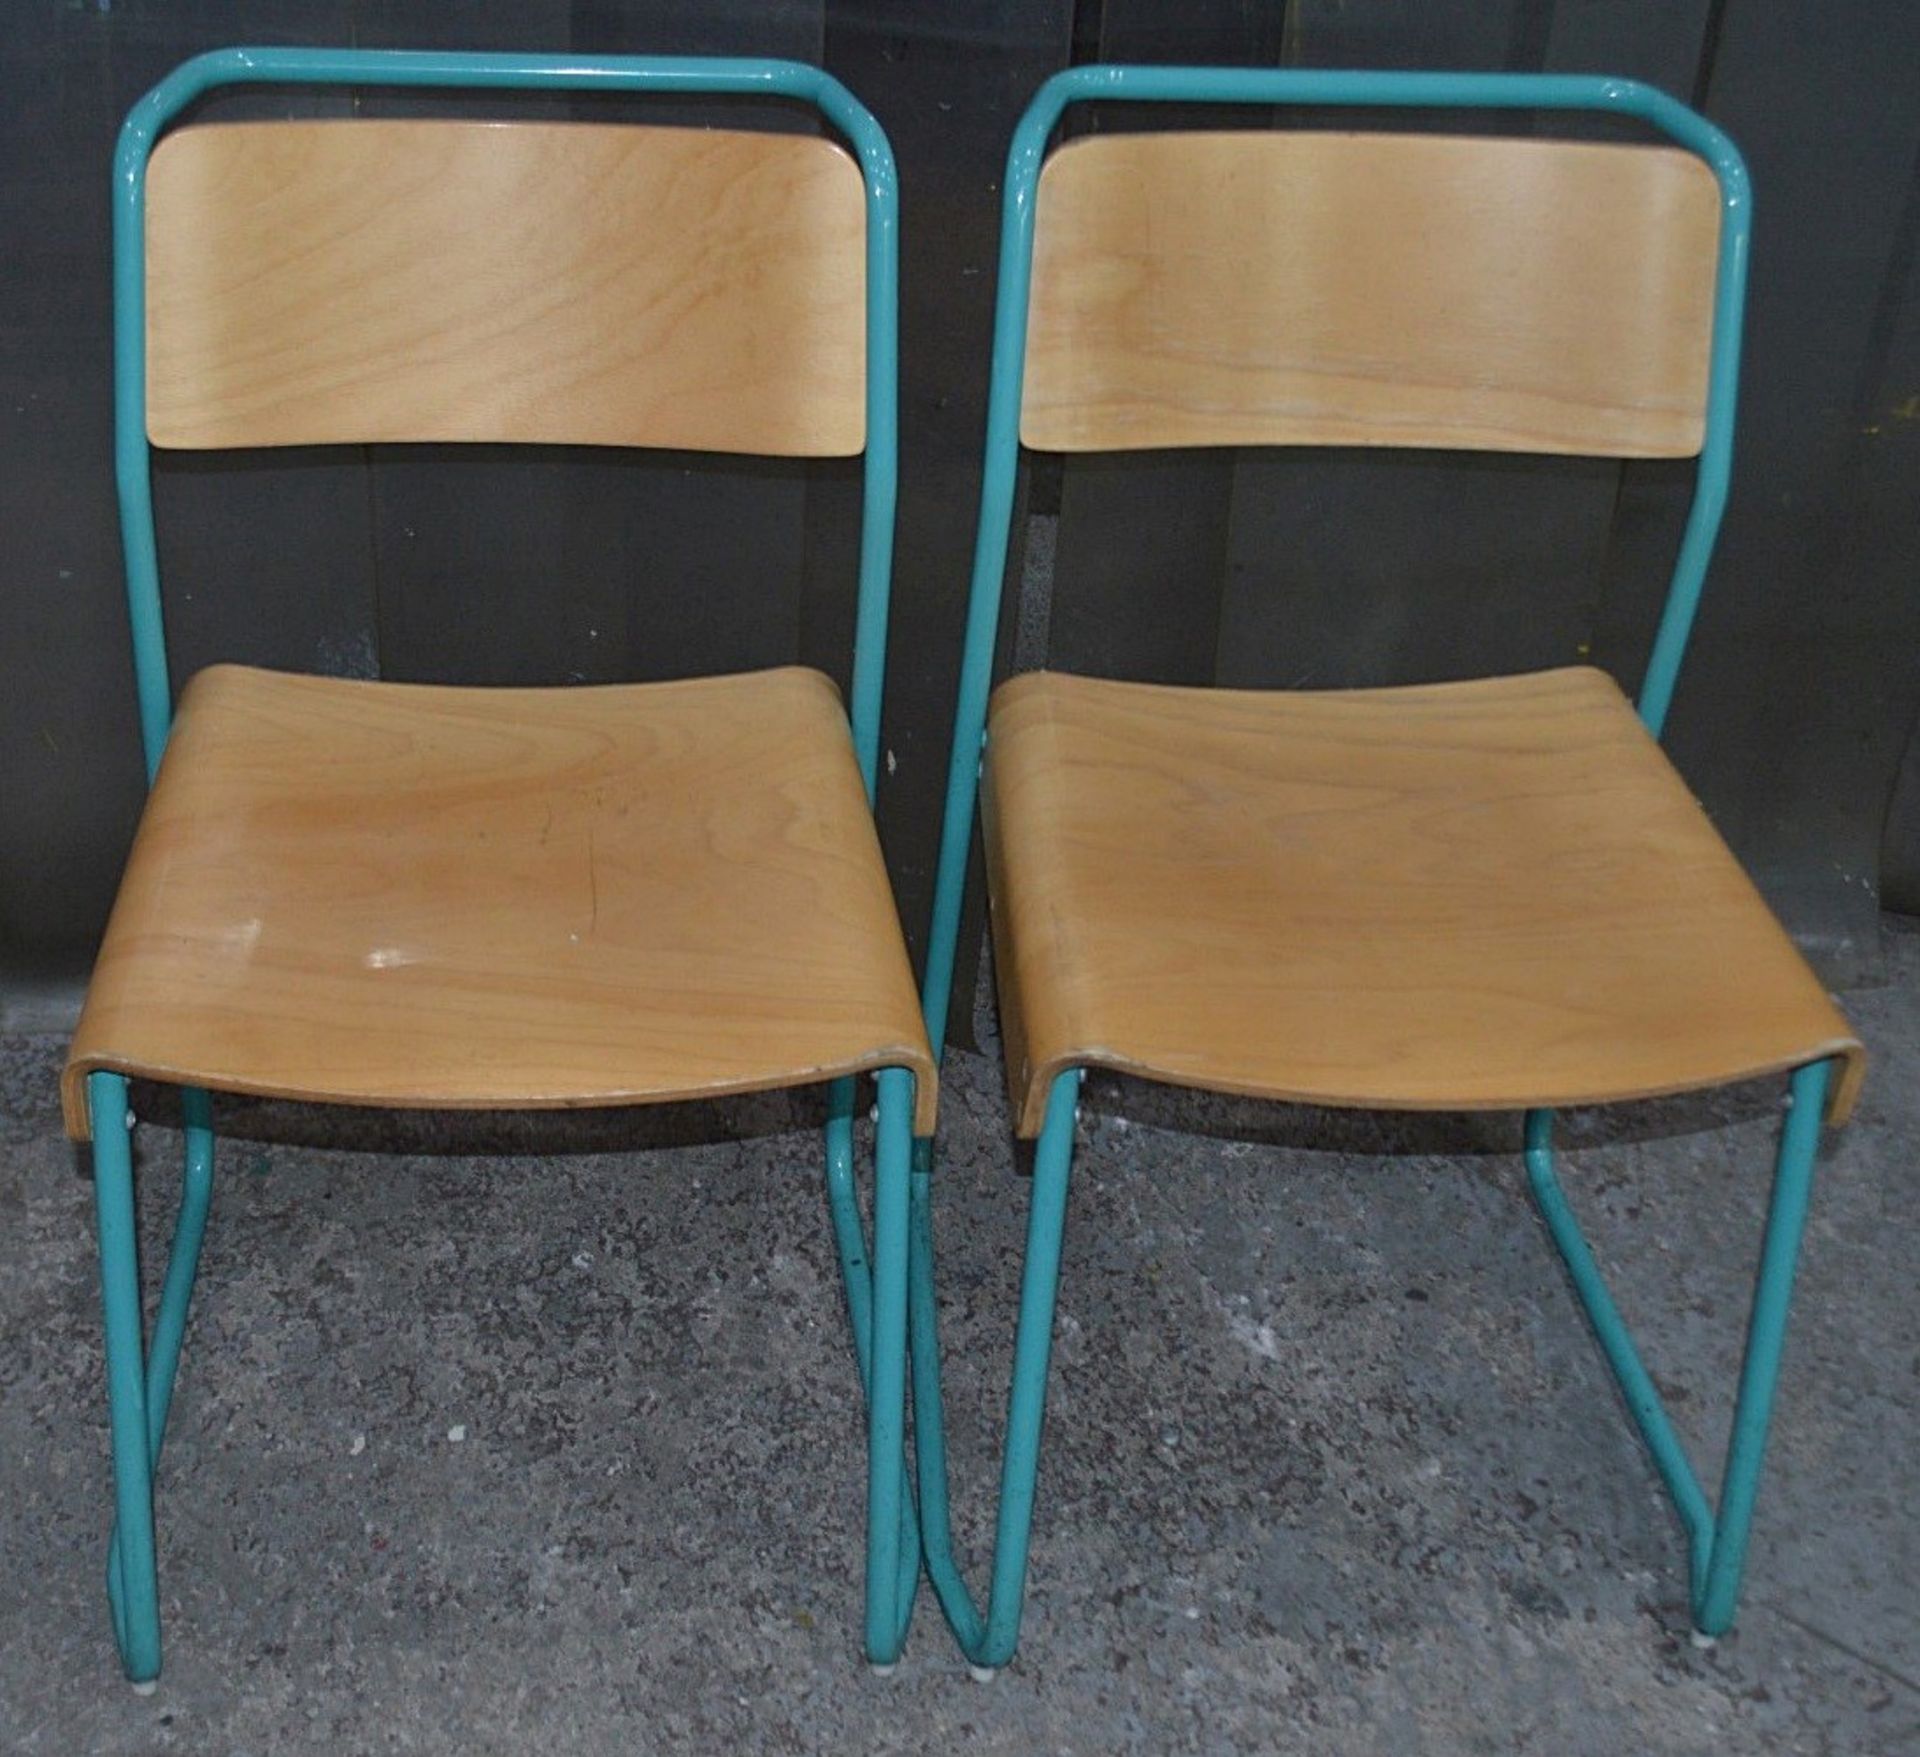 6 x Contemporary Stackable Bistro / Bar Chairs With Metal Frames With Curved Vanished Wooden Seats - Image 3 of 12